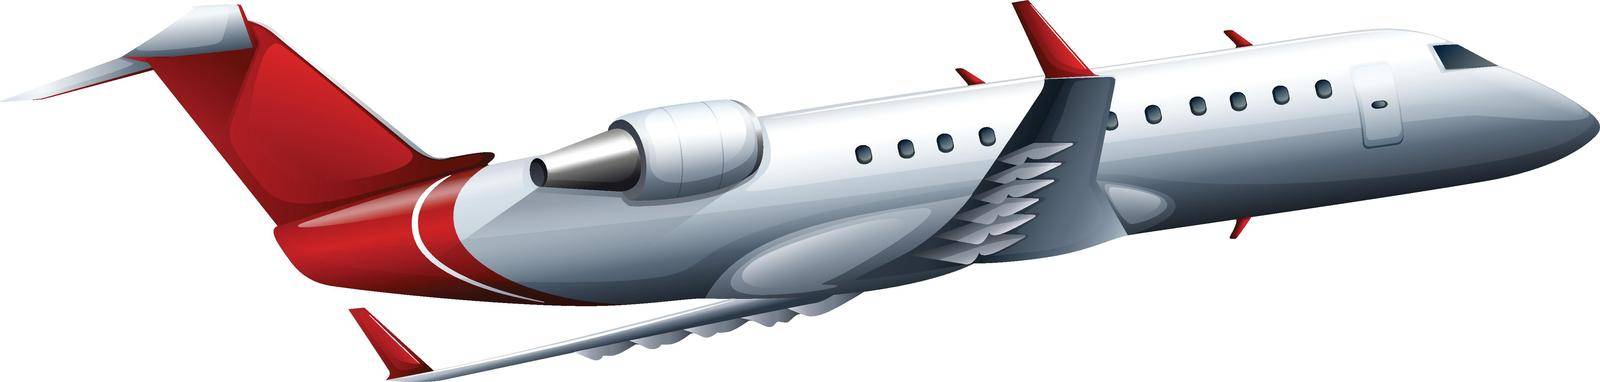 Illustration of a flying craft on a white background